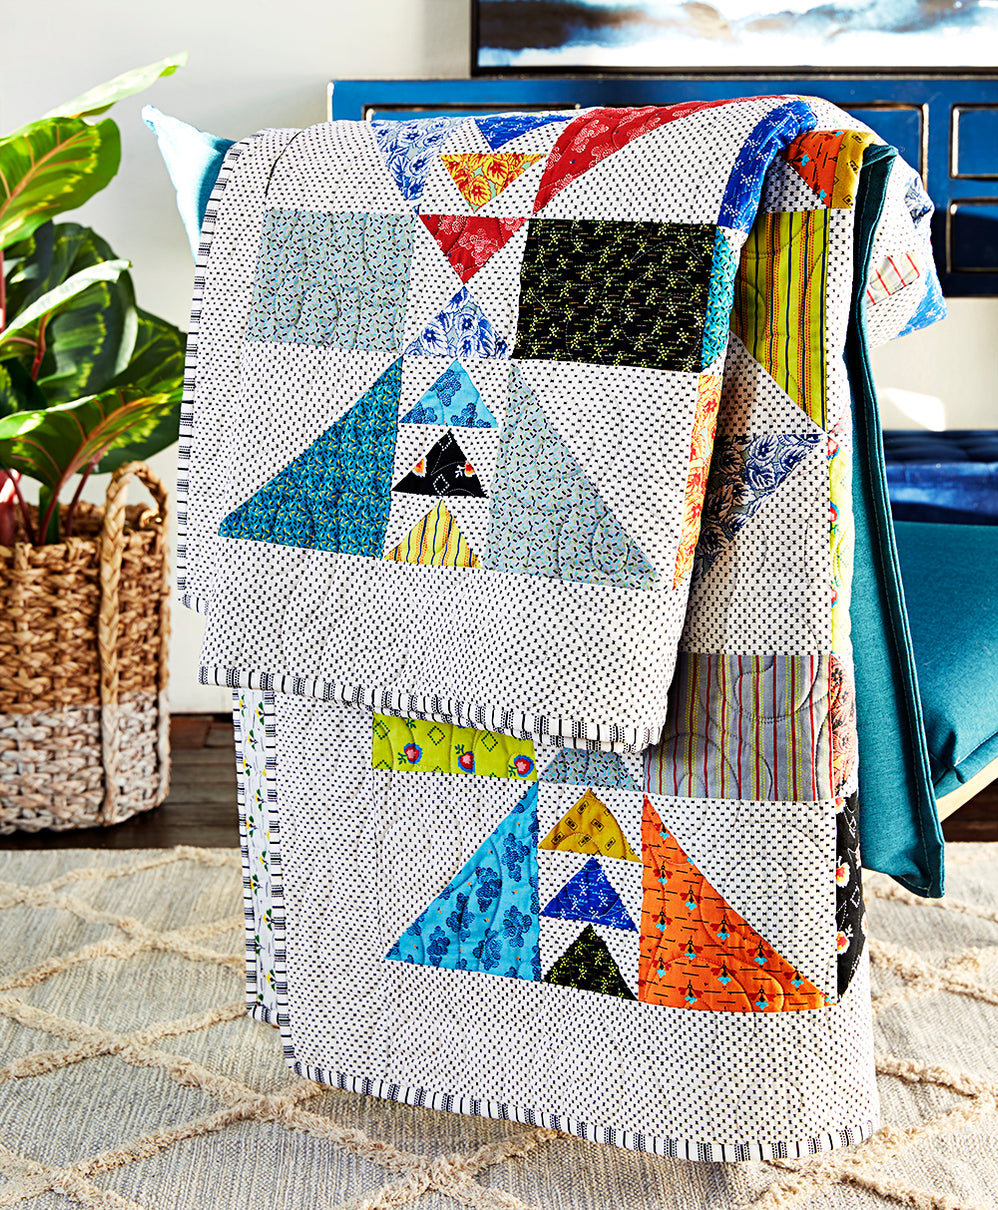 Chasing Geese Quilt Kit — Better Homes and Gardens Shop